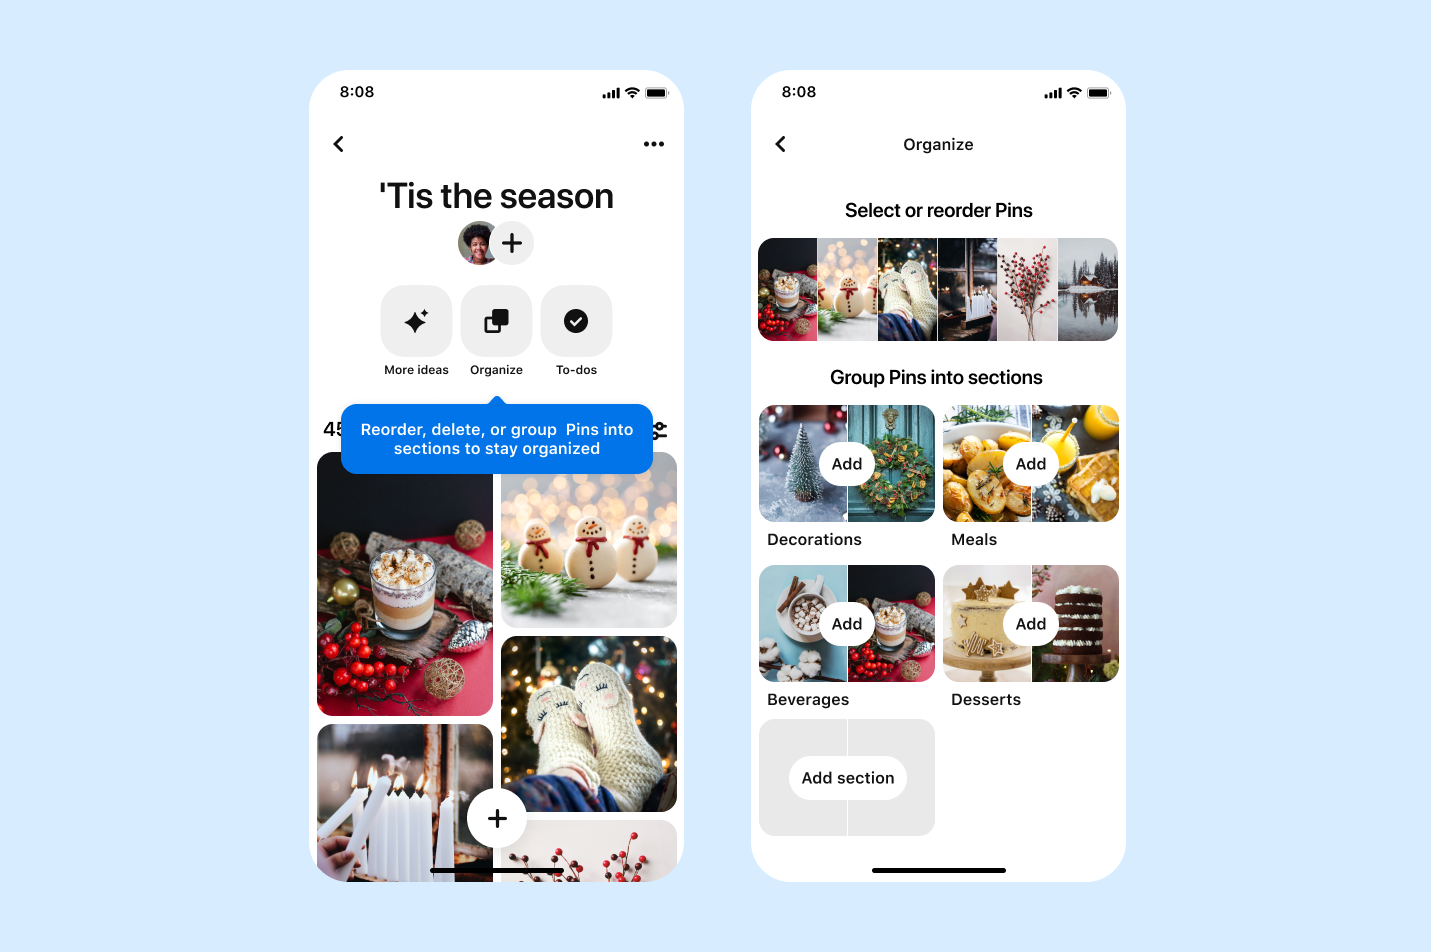 Pinterest launches new board features including notes to self on Pins, board favorites and a board toolbar